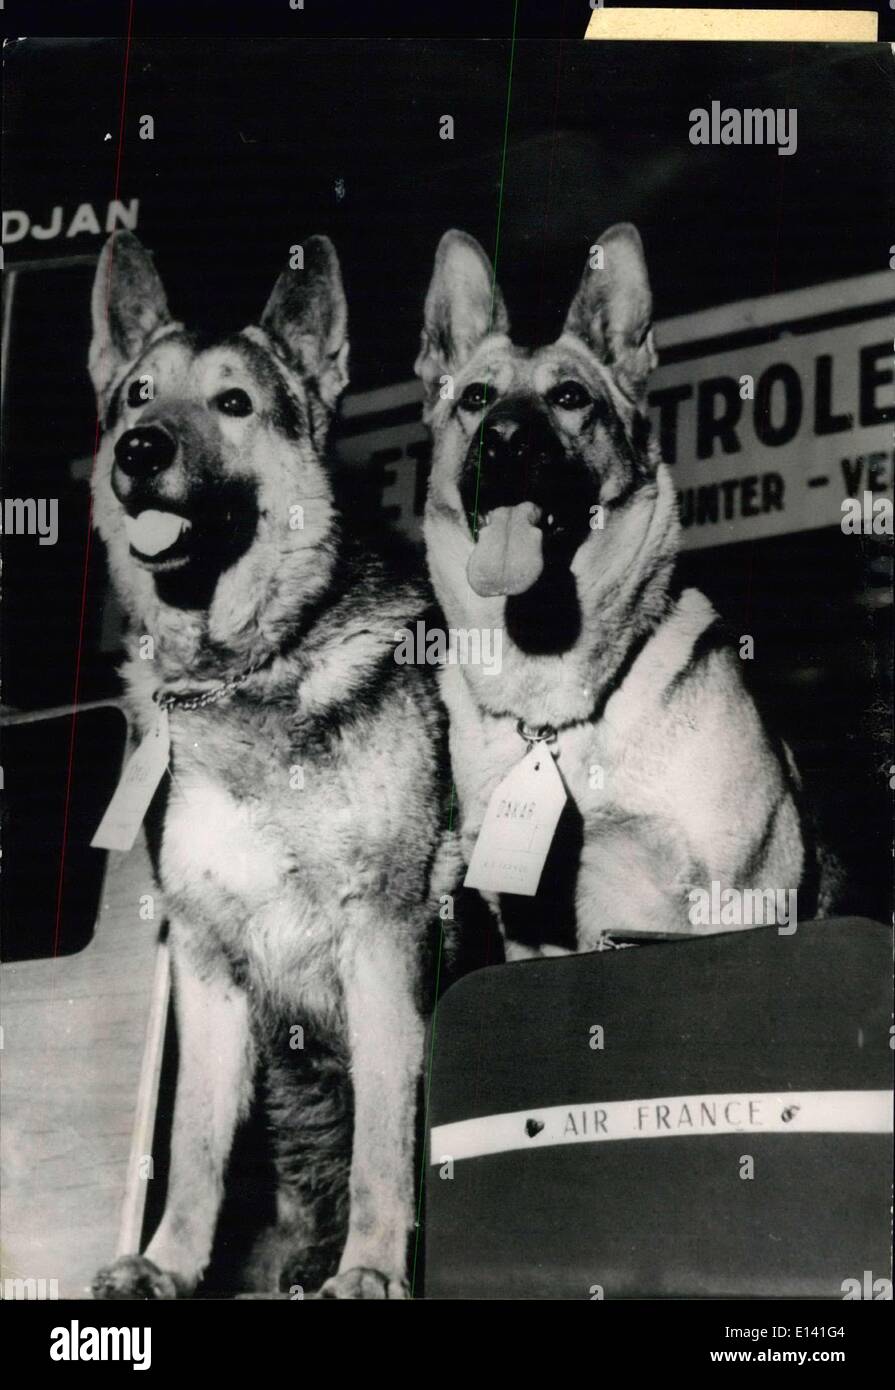 Mar. 31, 2012 - En Route for Dakar.: A important dog show will take place in Dakar (French Africa) on December 18. Photo shows Bearing their tags, two competitors ''Bella'' and ''Ullmo'' wait quiteluy for the taking off of airrance aircraft Stock Photo